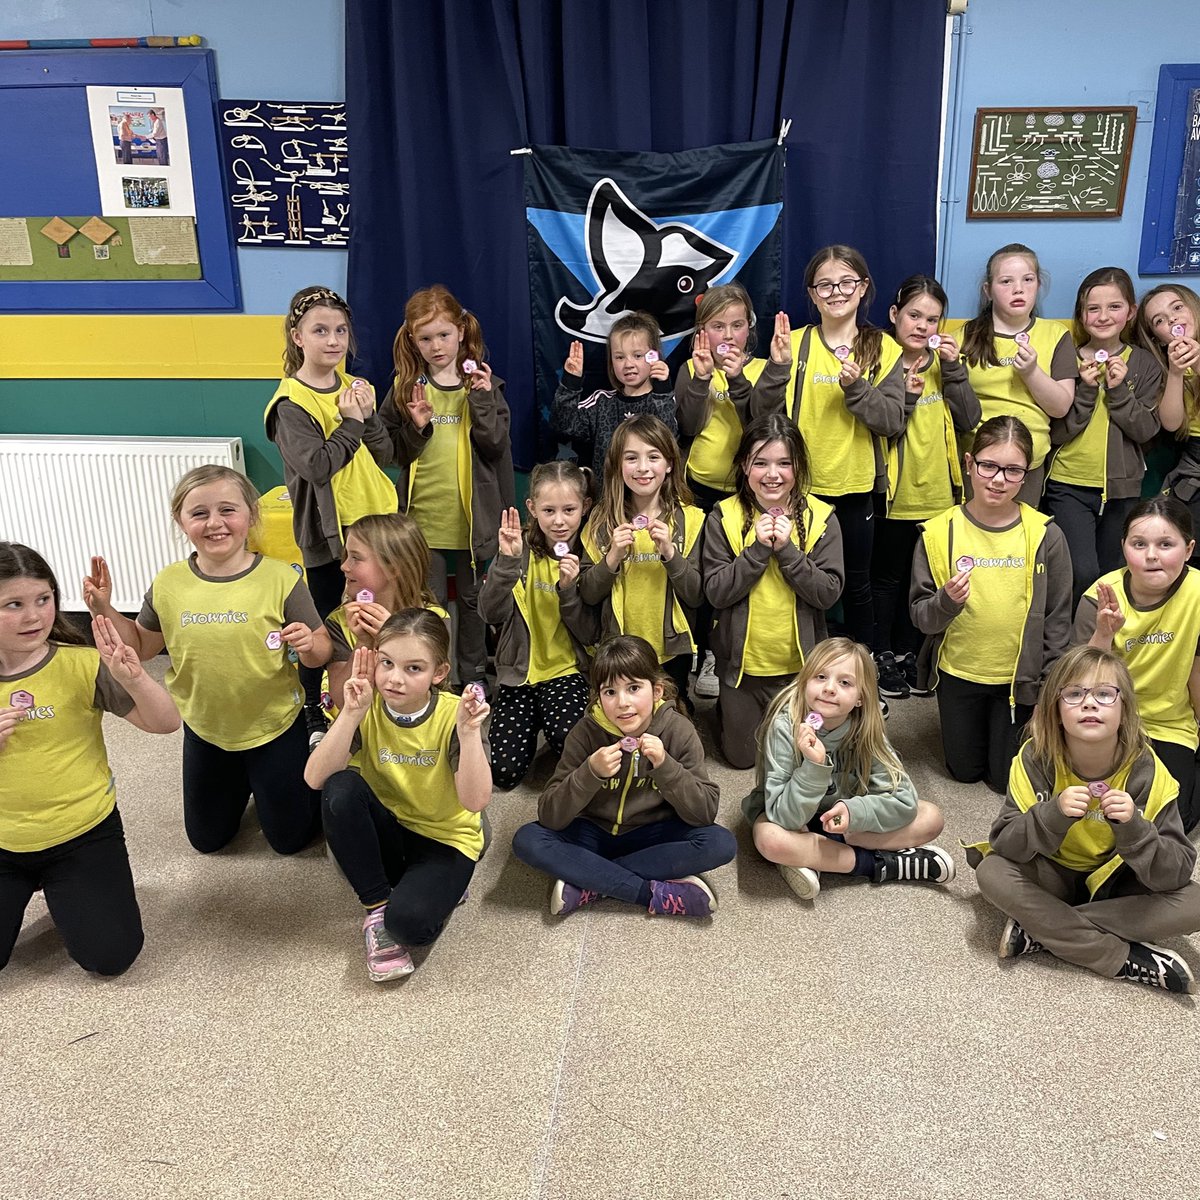 Fajita fun, completing the Skills builder Live smart stage 2 badge. If you’re hungry for more, you can keep up with the Oystercatchers on our blog oystercatchers.org.uk/blog and find out more about signing up for #Rainbows (4-7yrs) and #Brownies (7-10yrs). #girlguiding